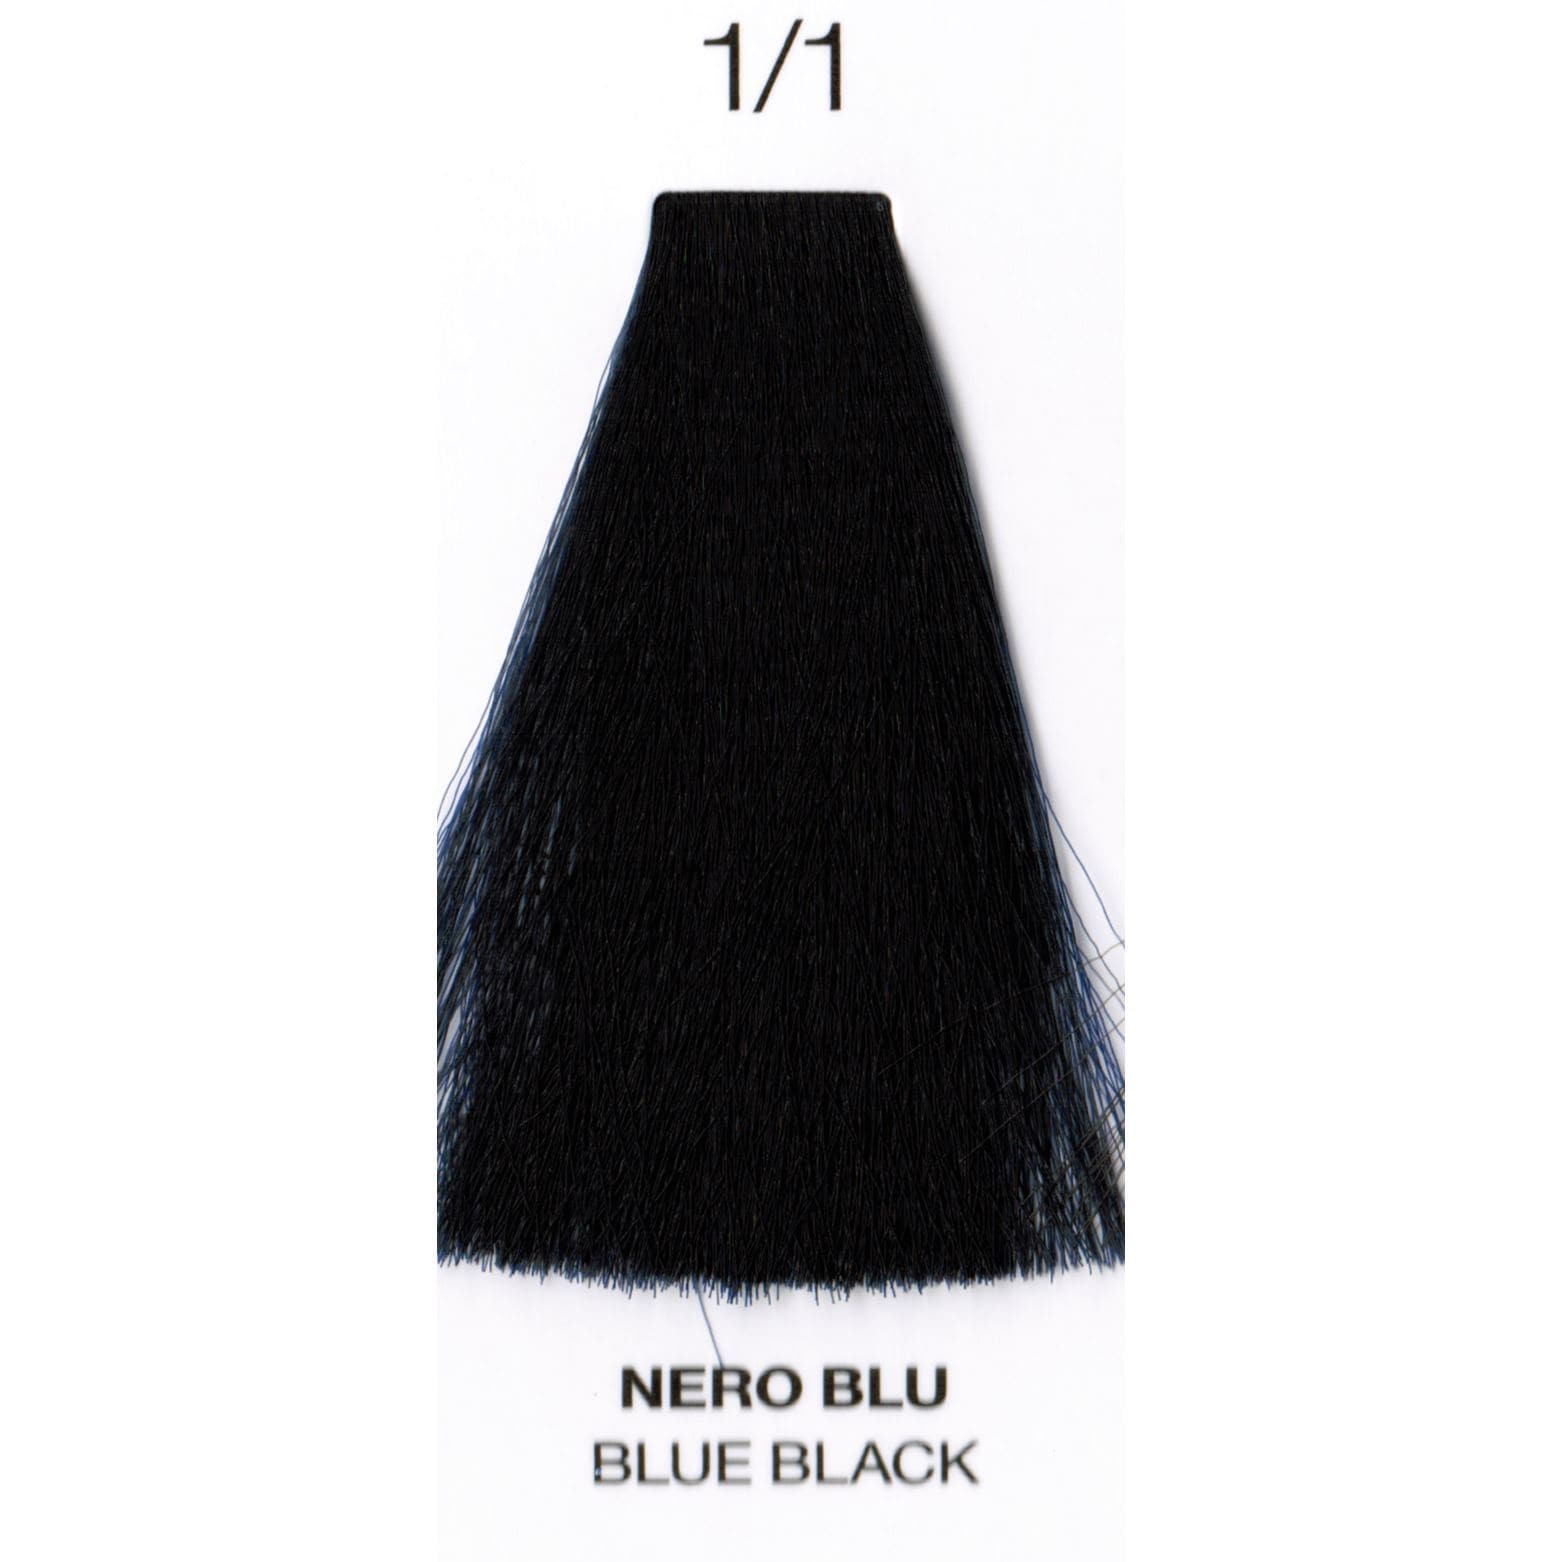 1/1 Blue Black | Ammonia-Free Permanent Hair Color | Purity | OYSTER - SH Salons